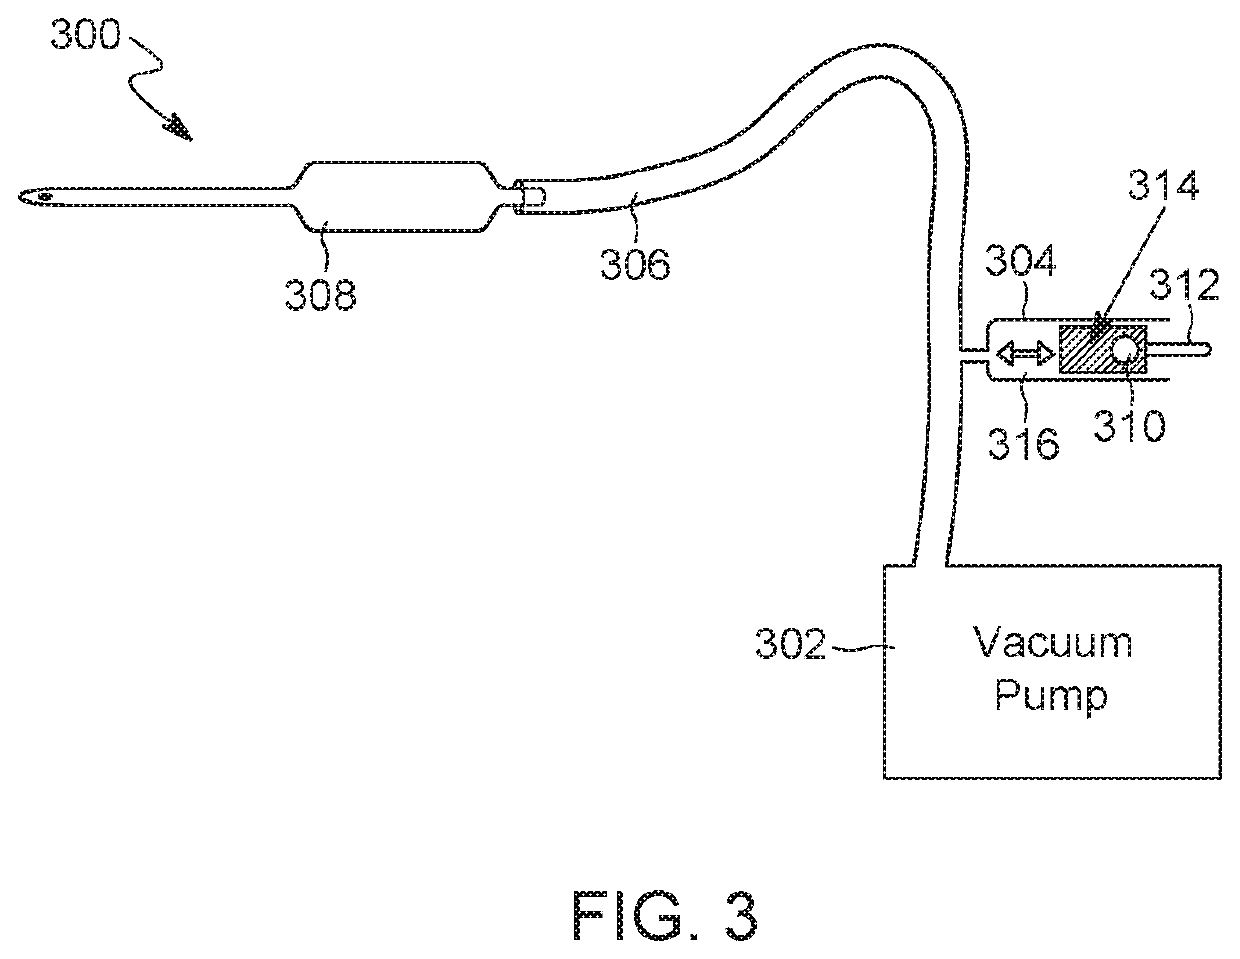 Systems, methods and handheld pulsatile aspiration and injection devices